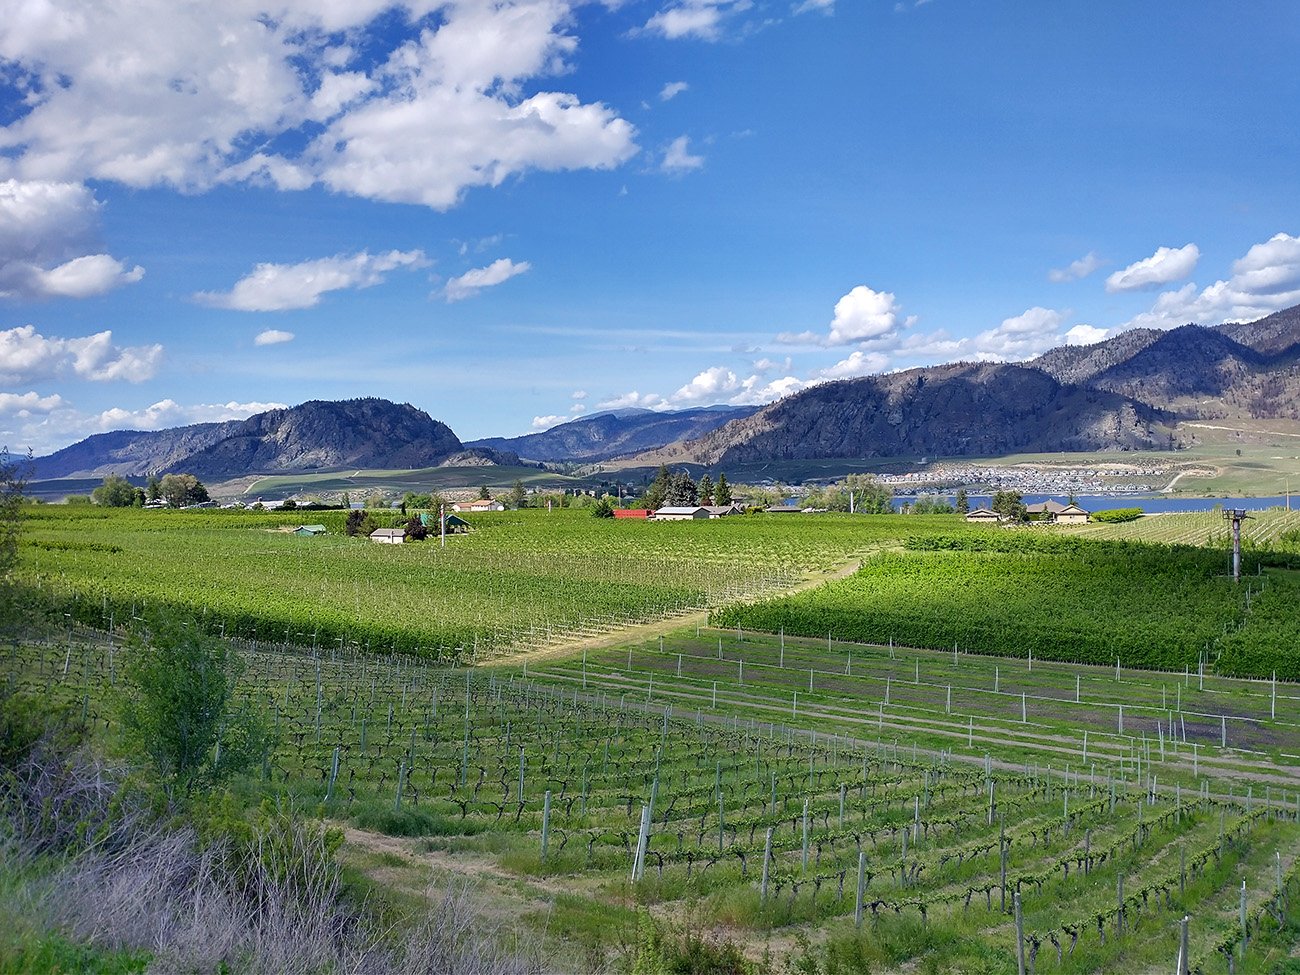 The entire river is flanked by these gorgeous vineyards and orchards Quite a unique sight in Canada.